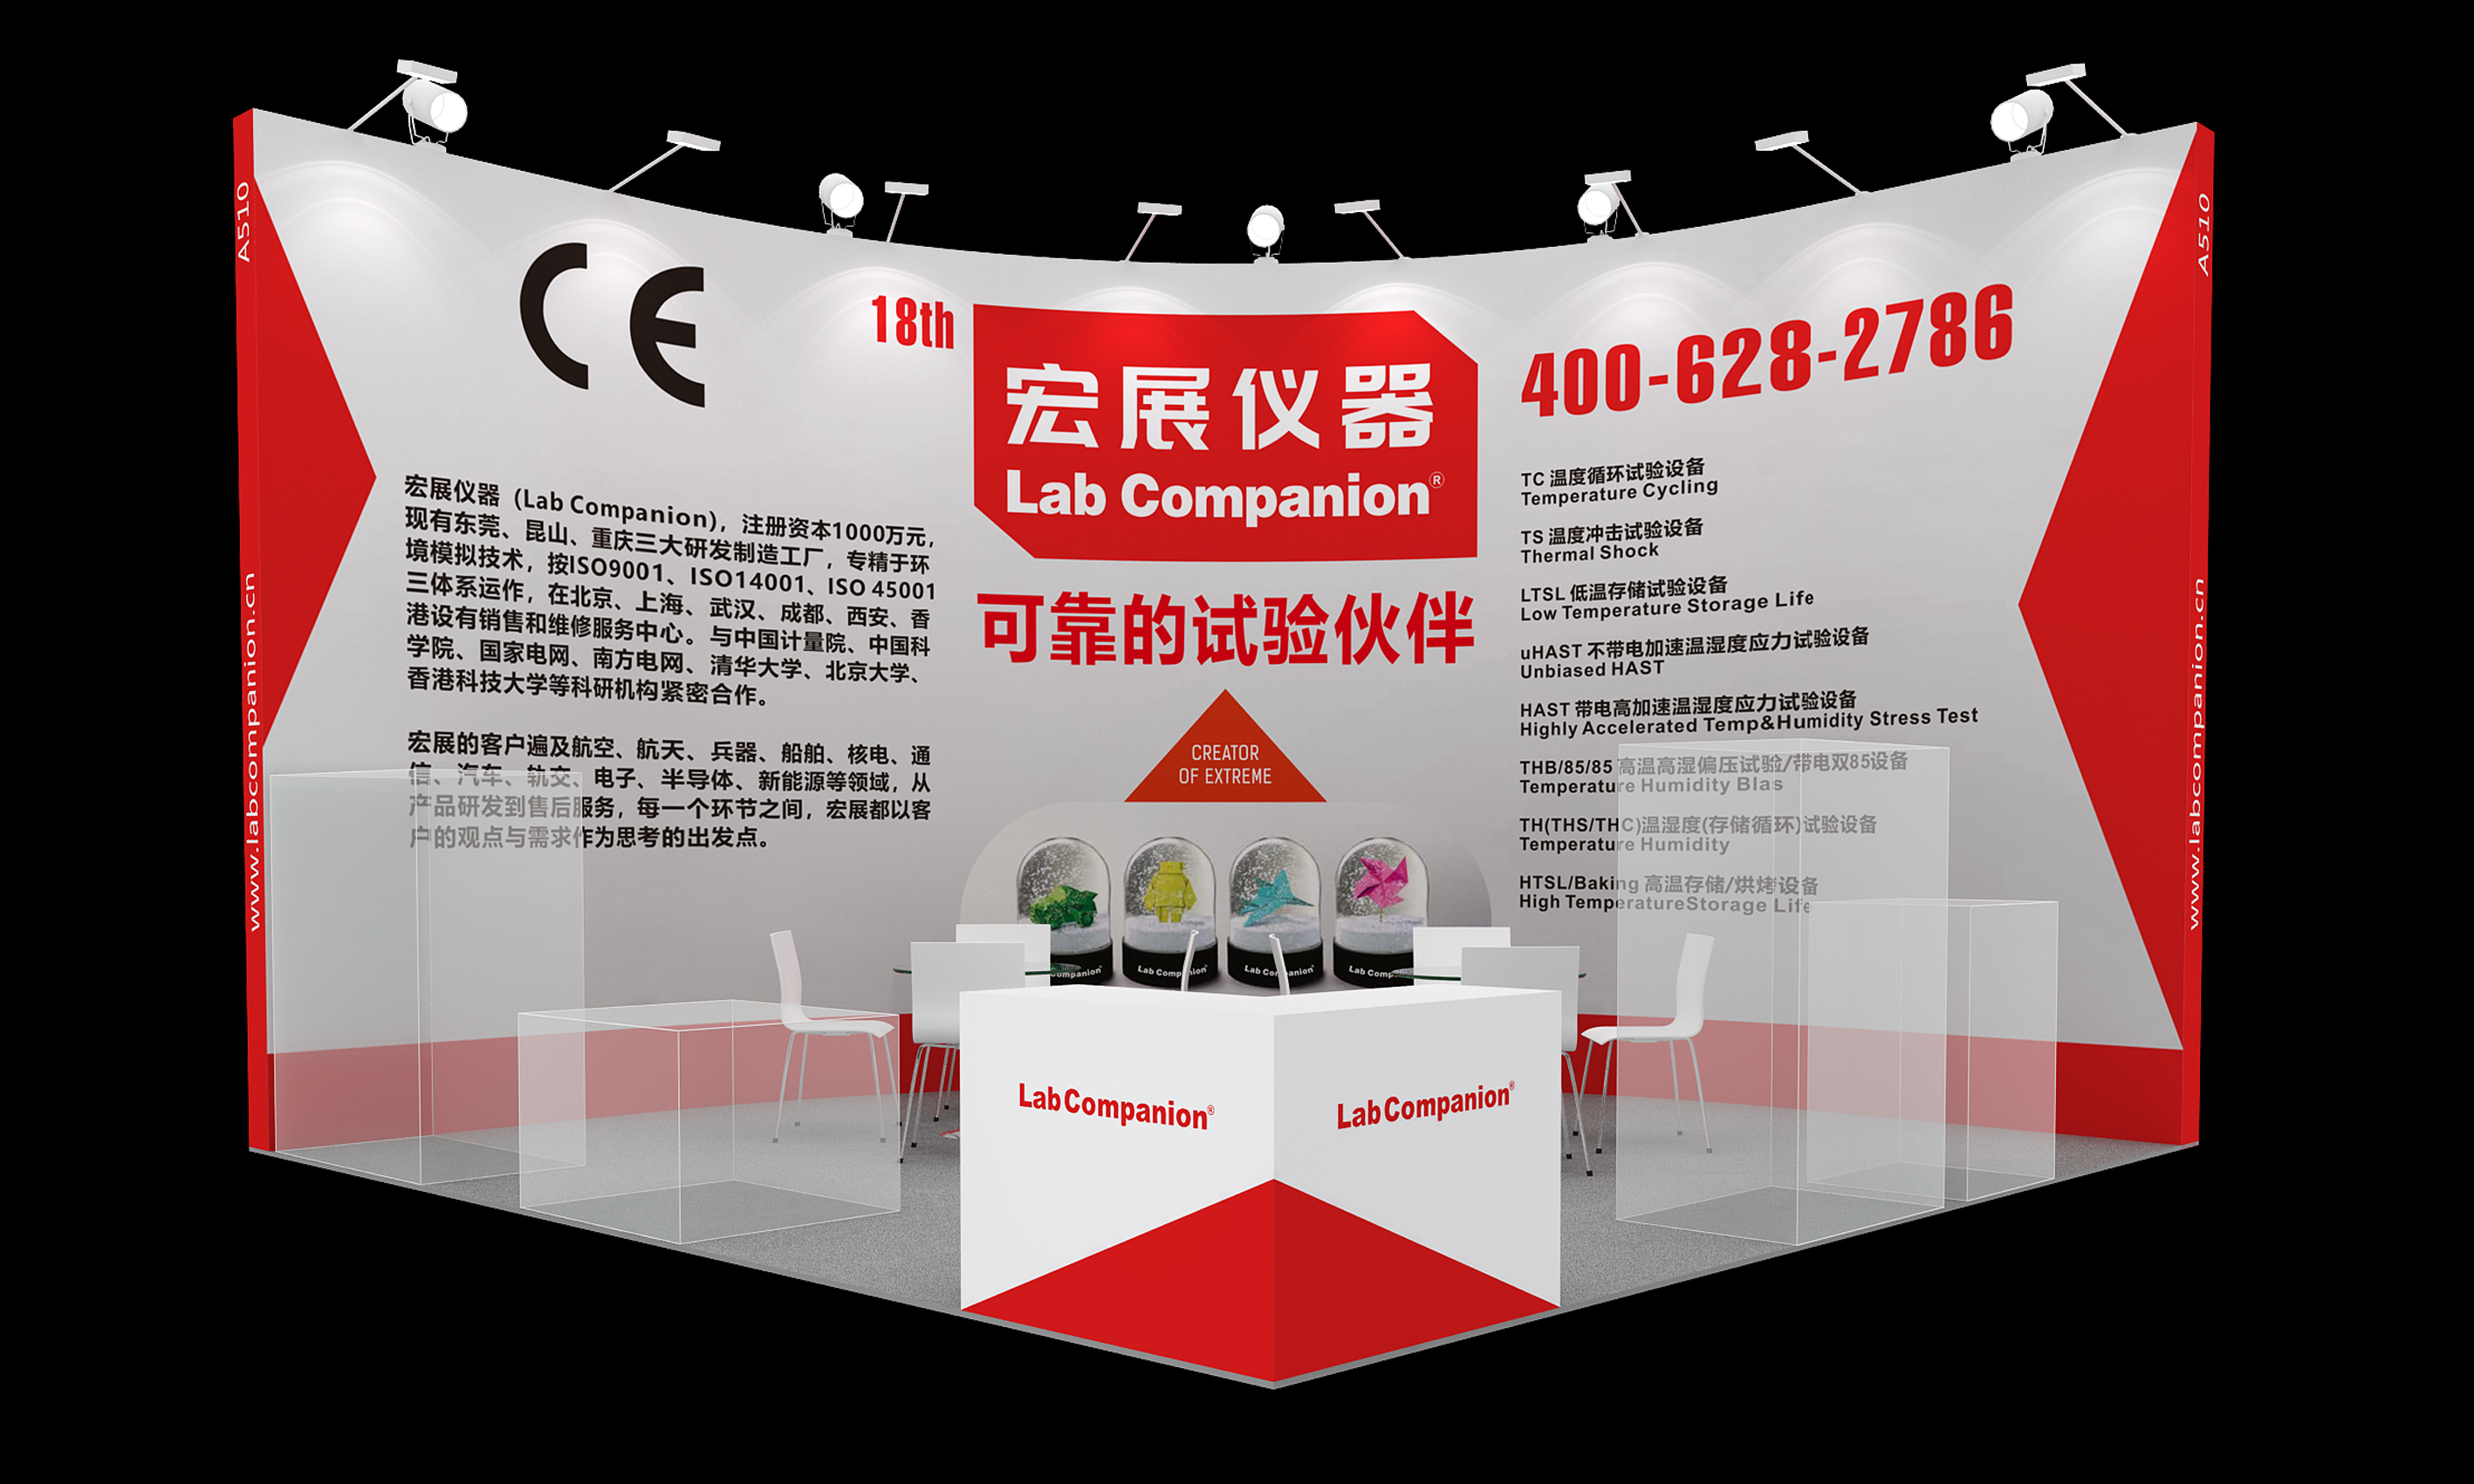 Read more : Lab companion meets you at the Electronic China Exhibition in Shang Hai